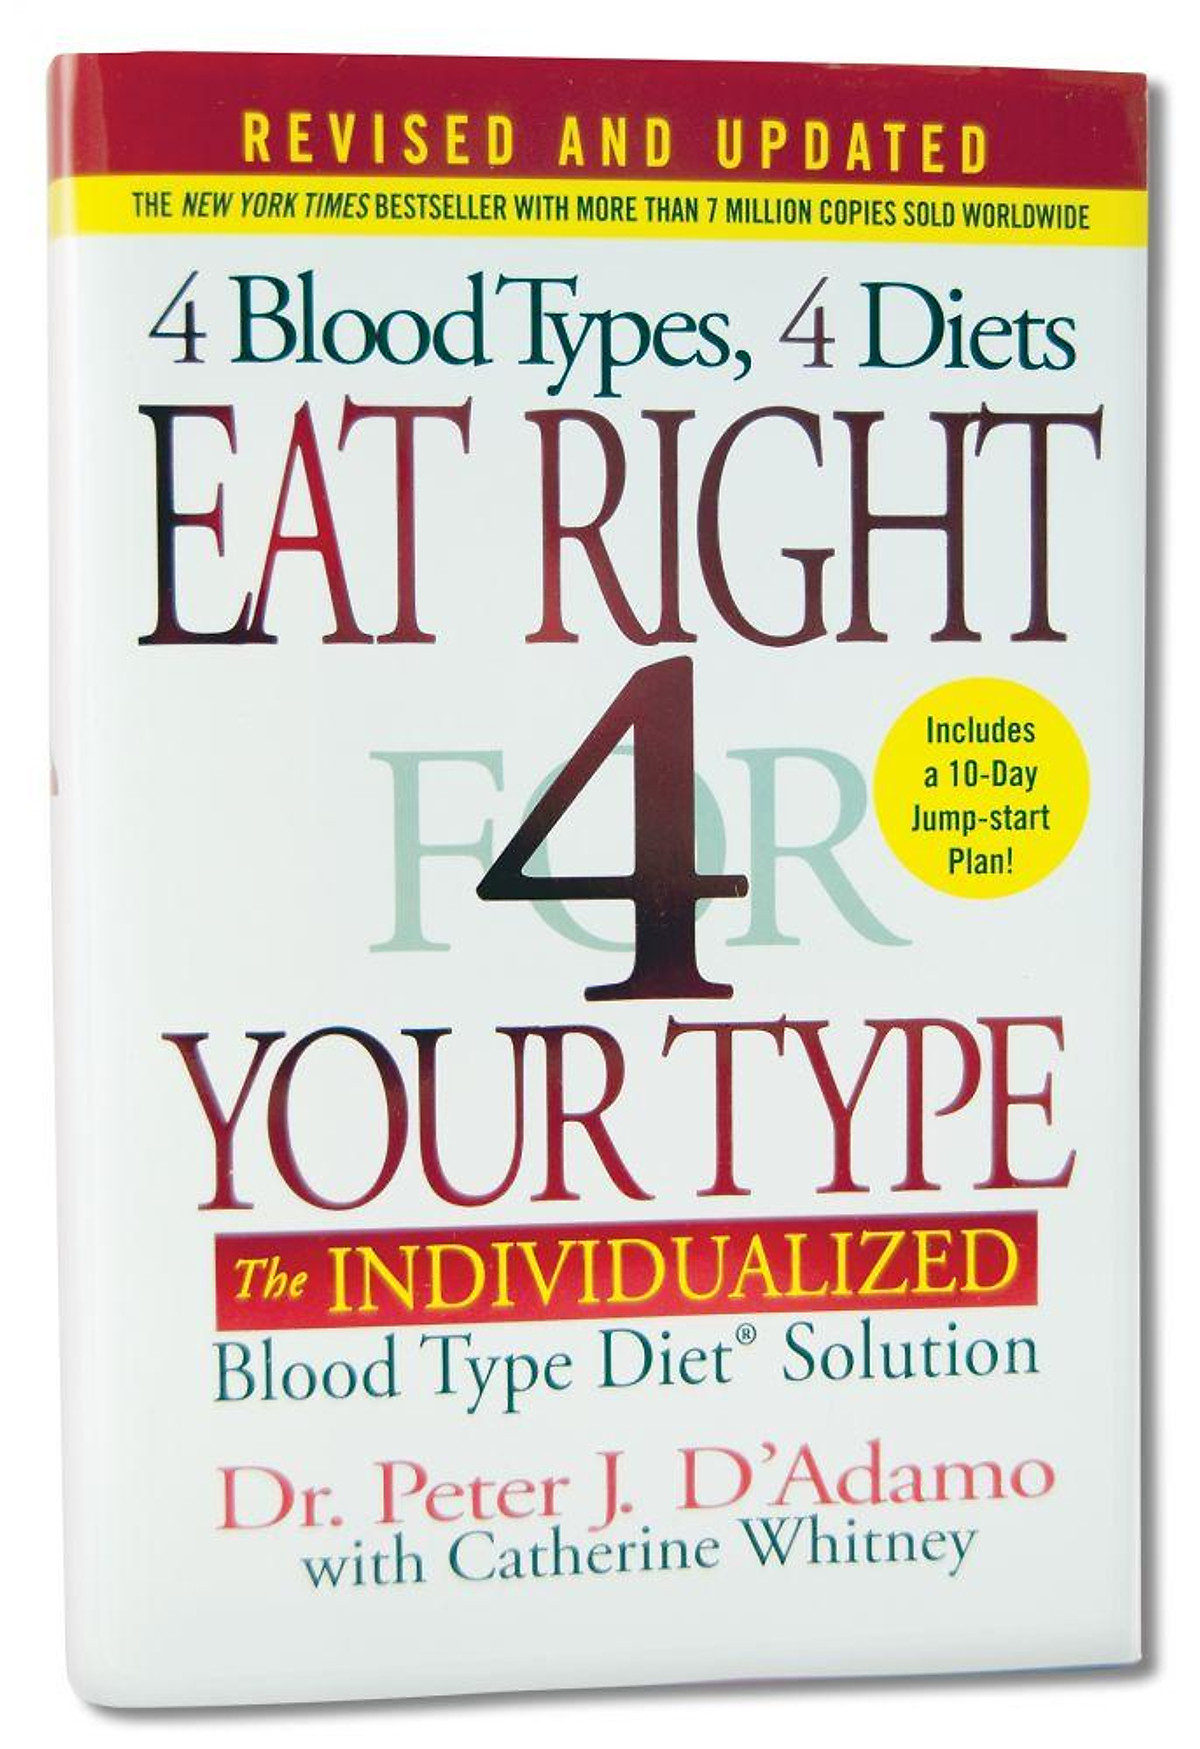 Eat Right 4 Your Type (Revised and Updated) : The Individualized Blood Type Diet (R) Solution